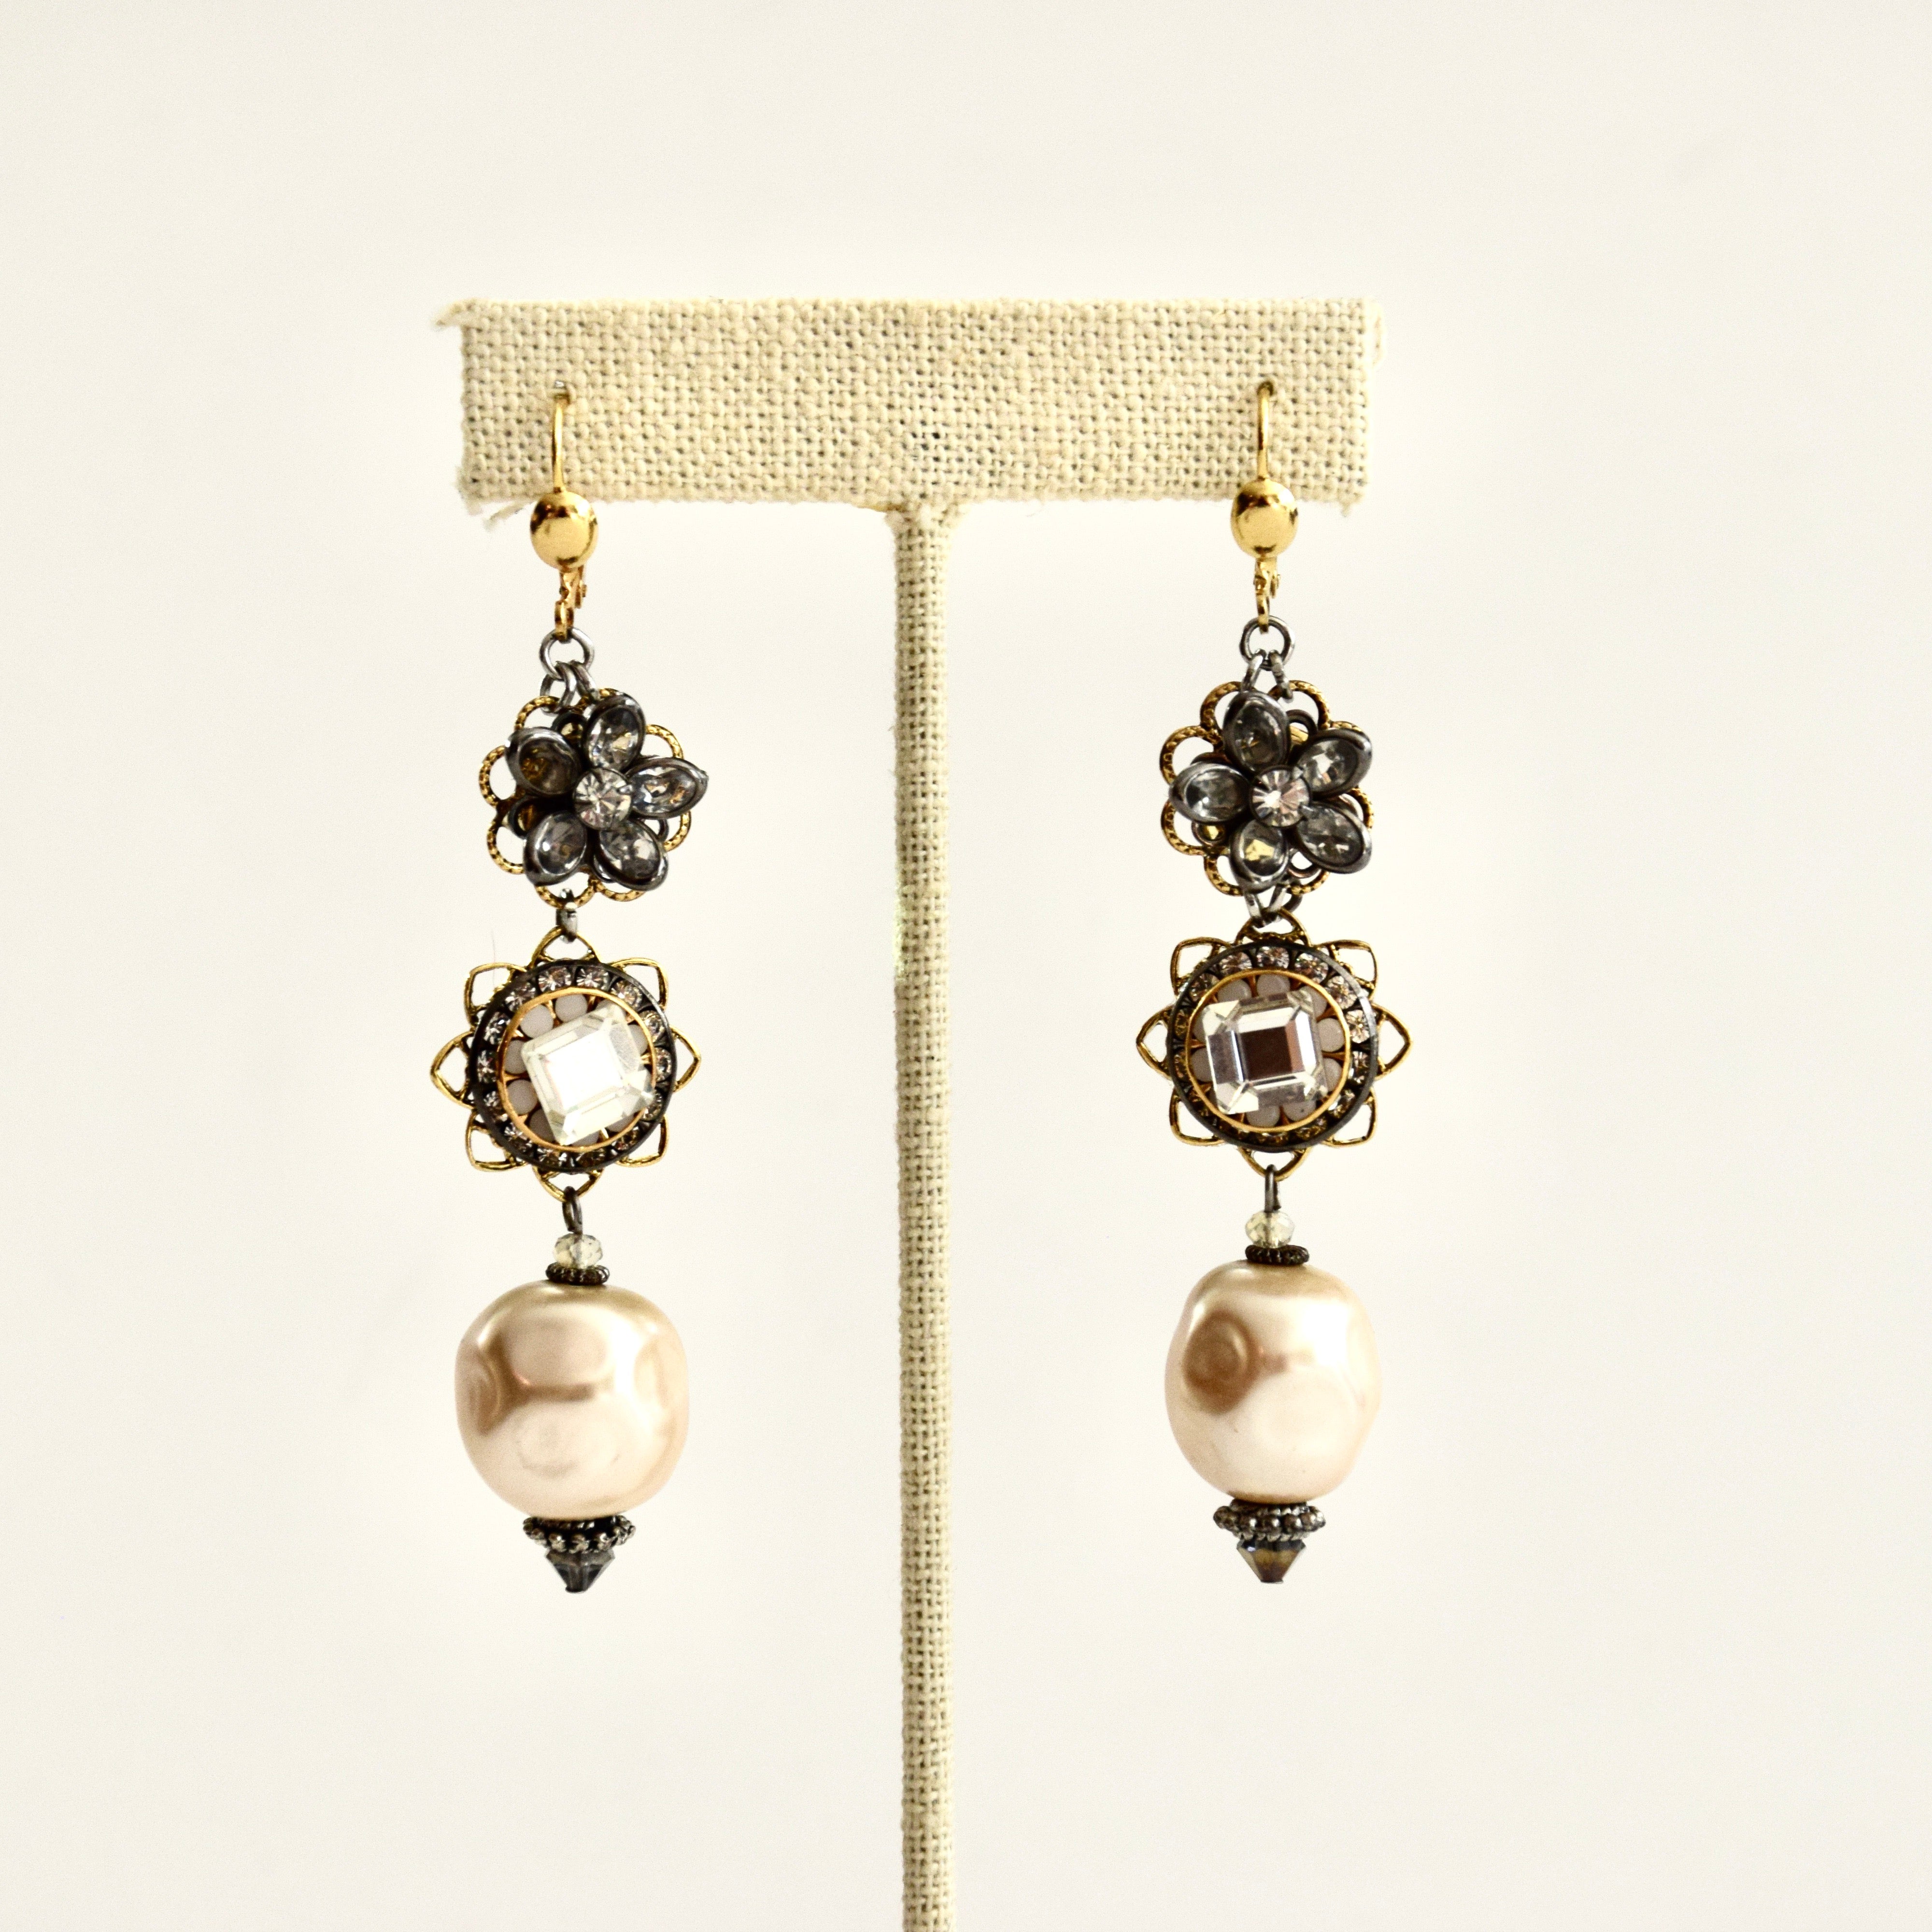 RGS-E006: Handcrafted Crystal Earrings